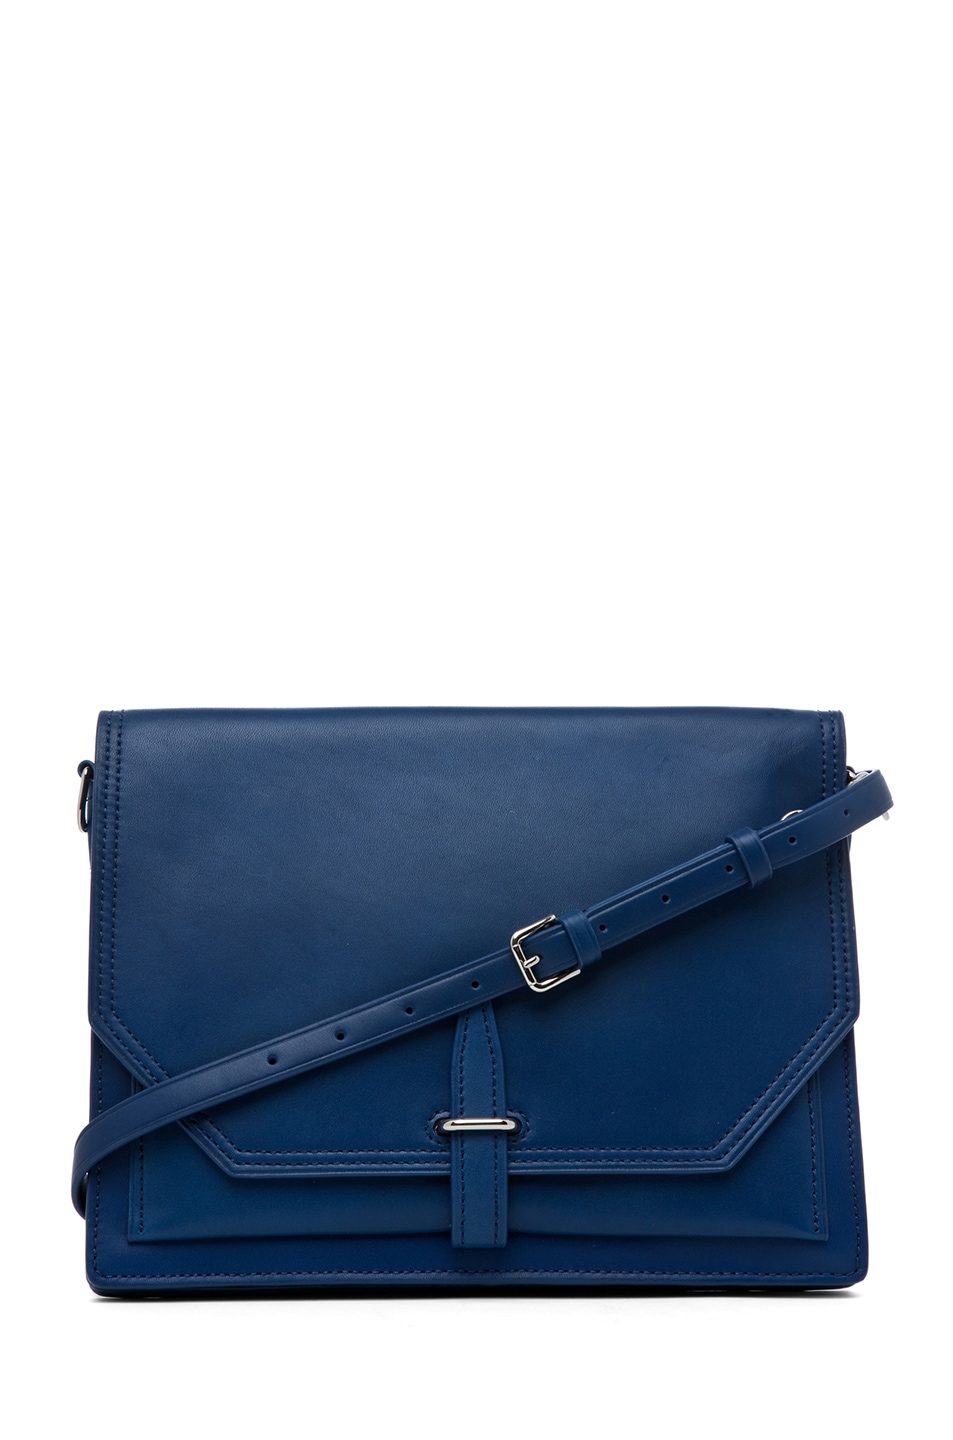 Image 1 of 3.1 phillip lim Polly Double Compartment Crossbody in Cerulean